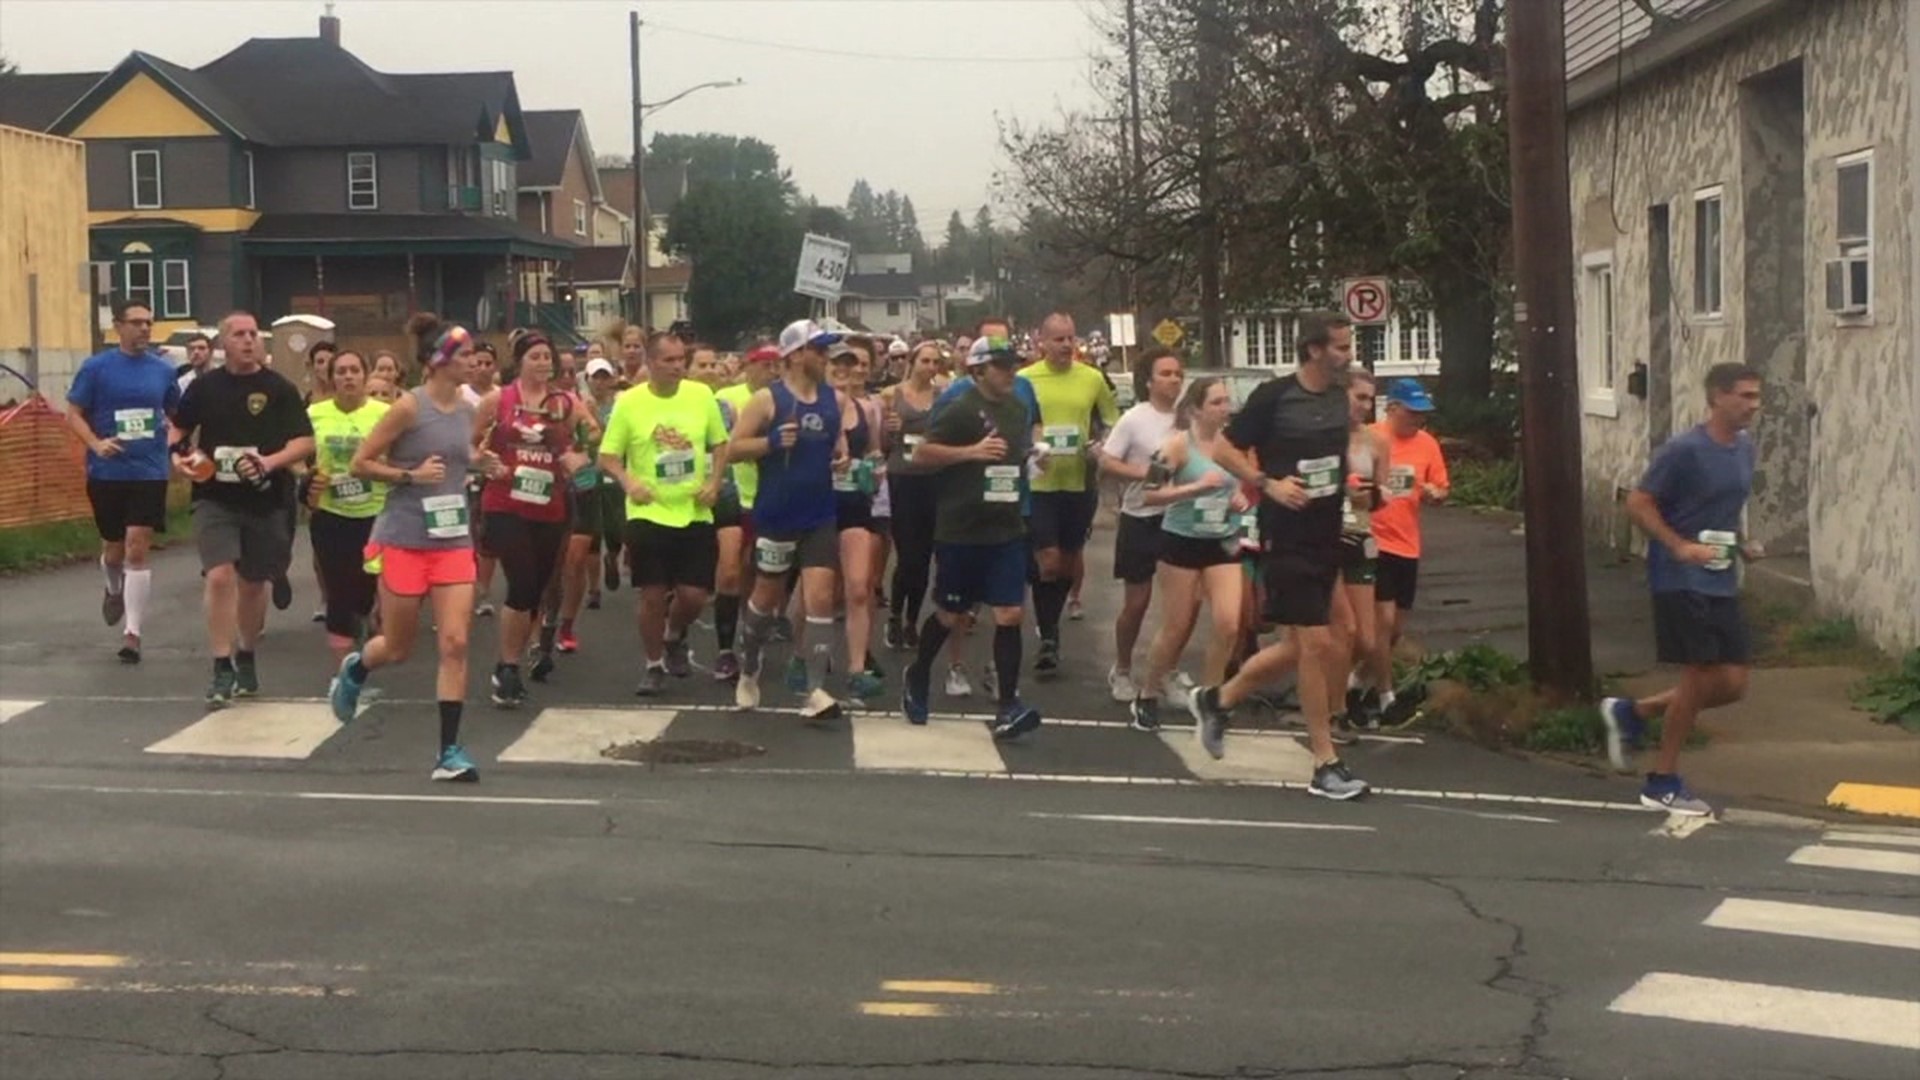 The race that draws thousands to the area has been postponed until next year to protect runners from the spread of the coronavirus.